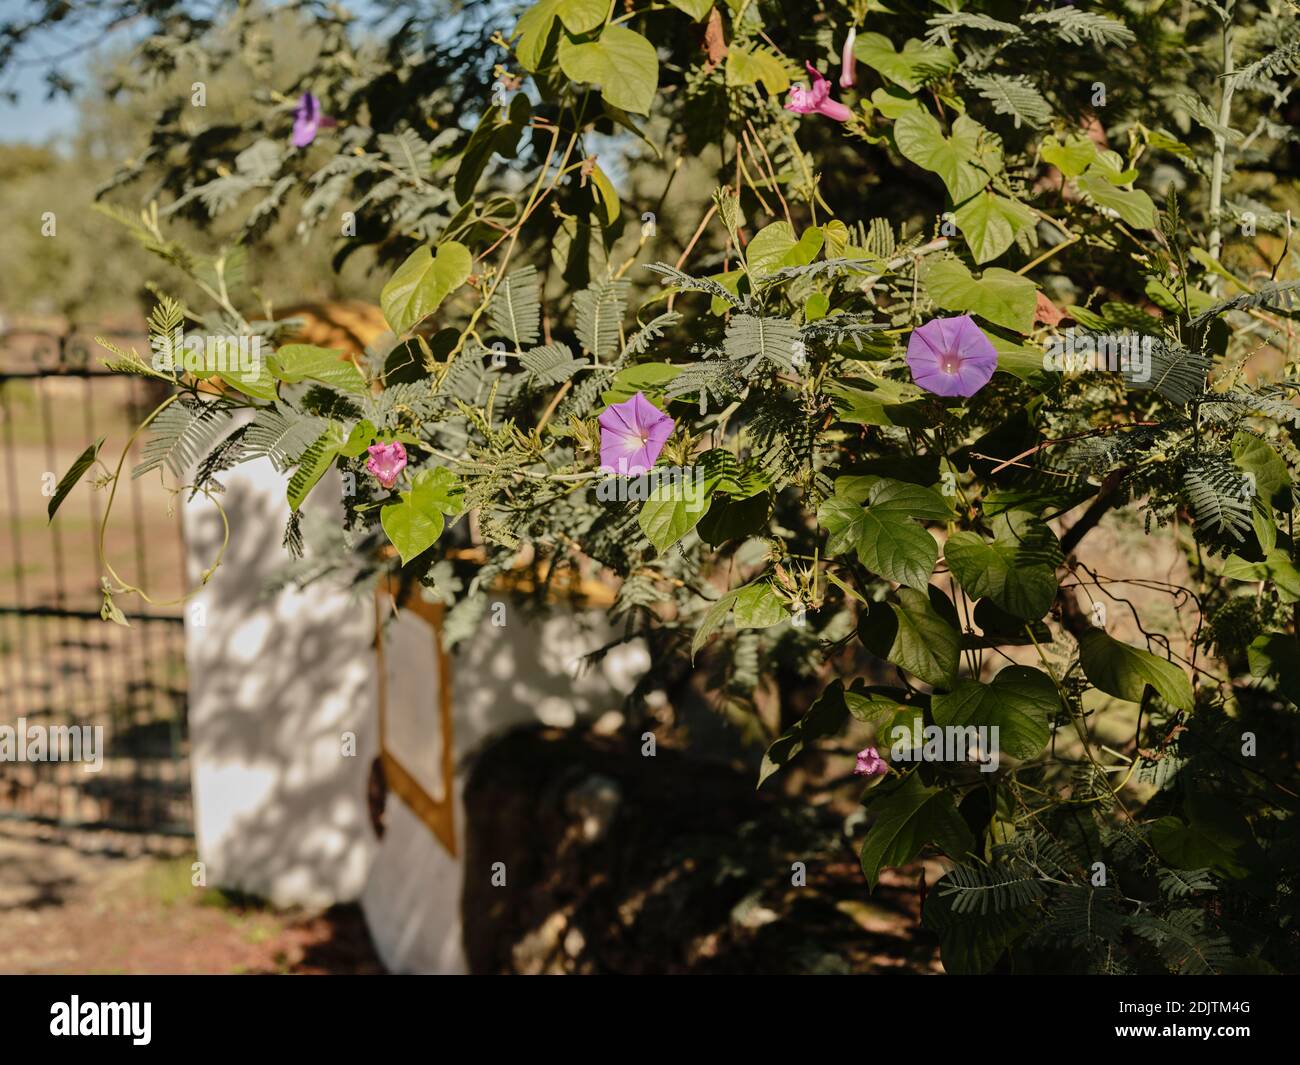 Morning glory flowers in Portuguese countryside Stock Photo